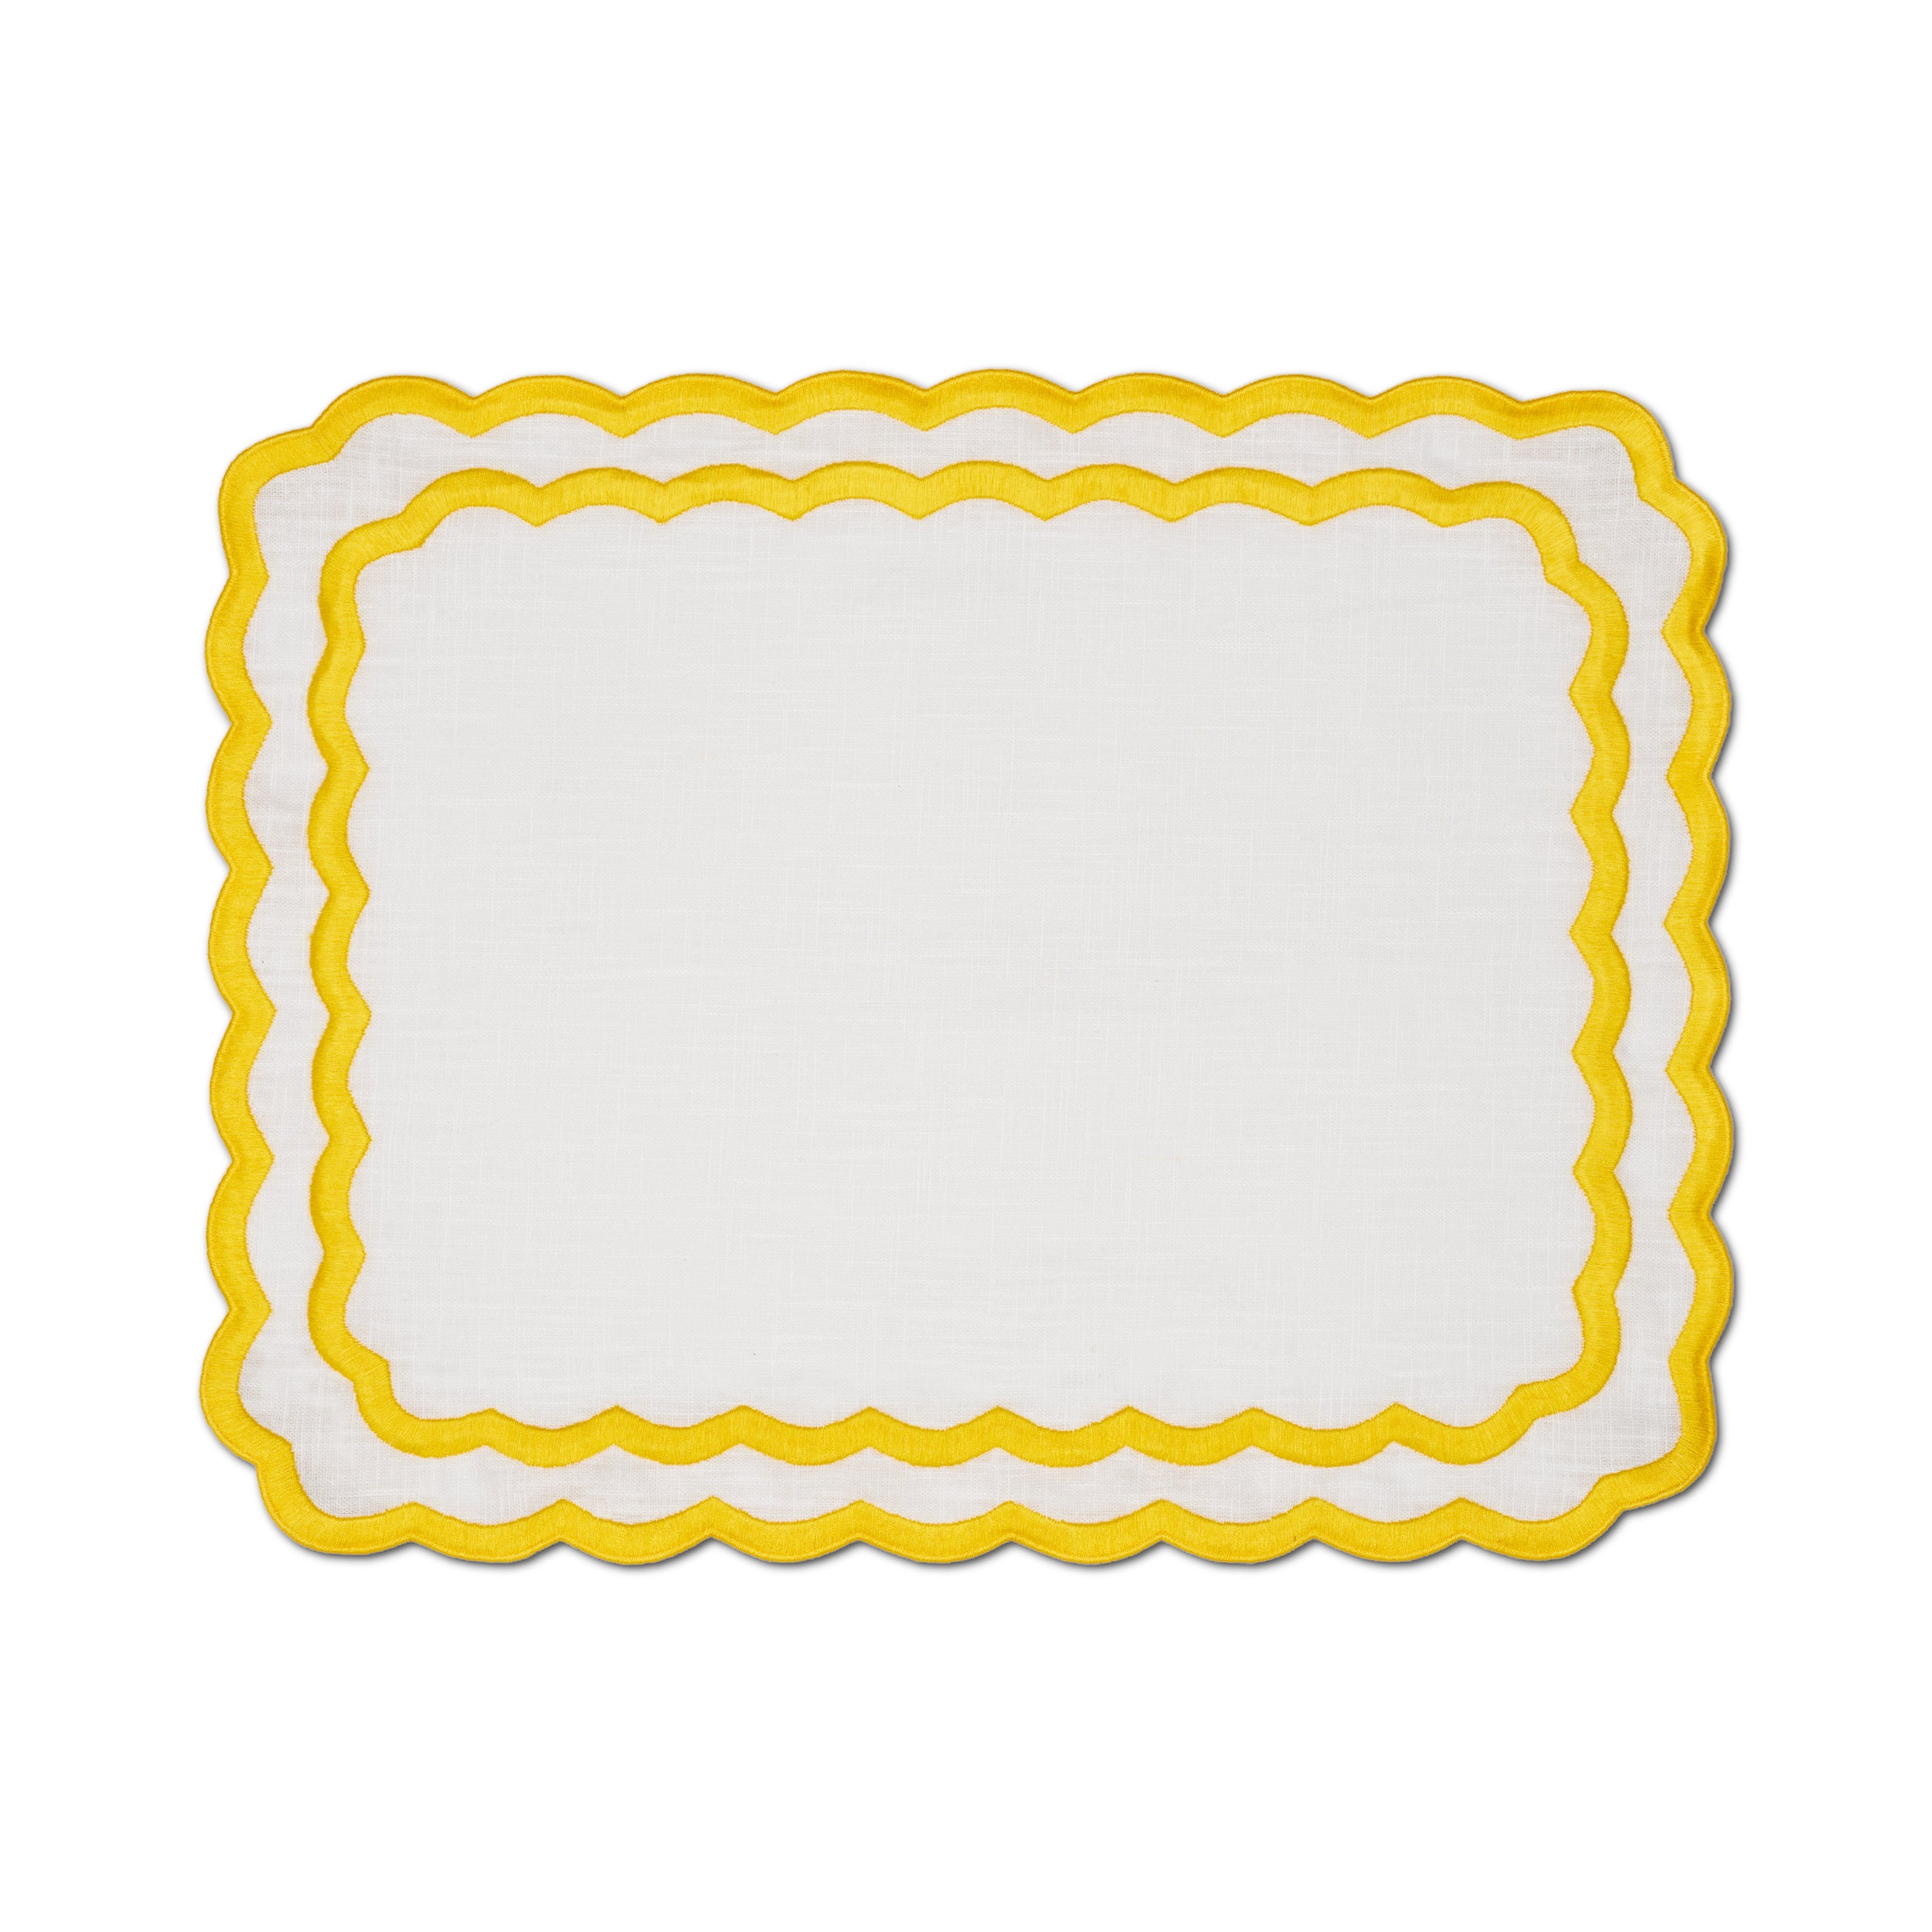 Marigold Placemat | White with Yellow- set of 4